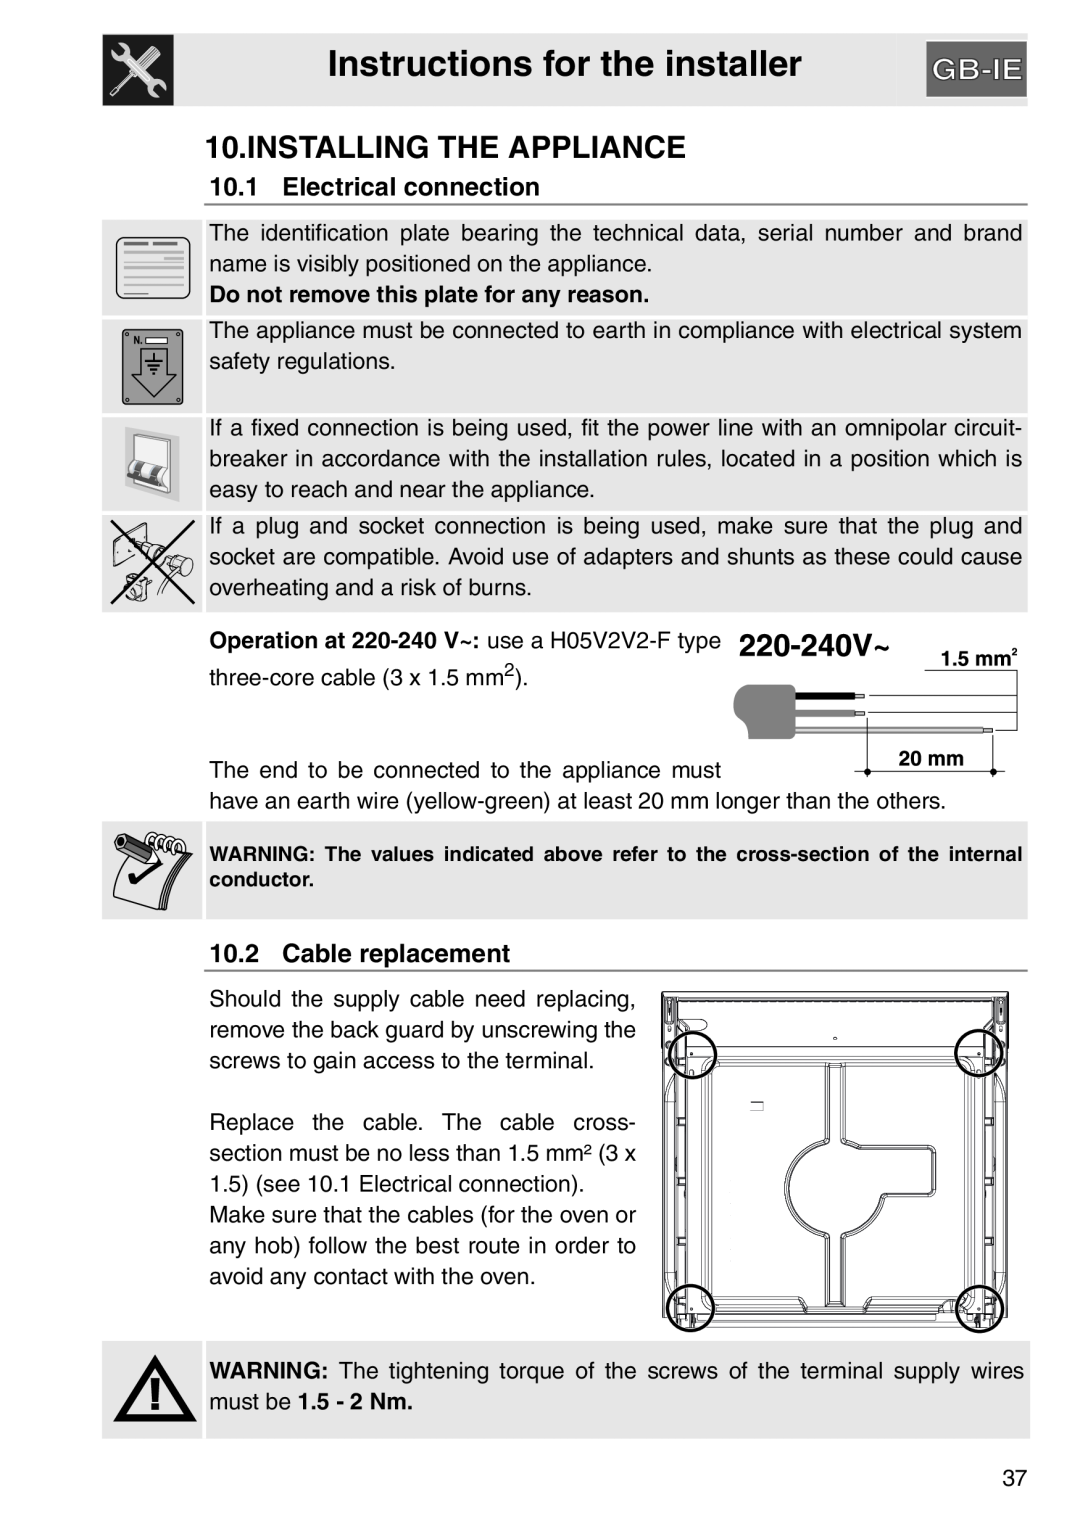 Smeg electric oven Instructions for the installer, Installing The Appliance, Electrical connection, Cable replacement 